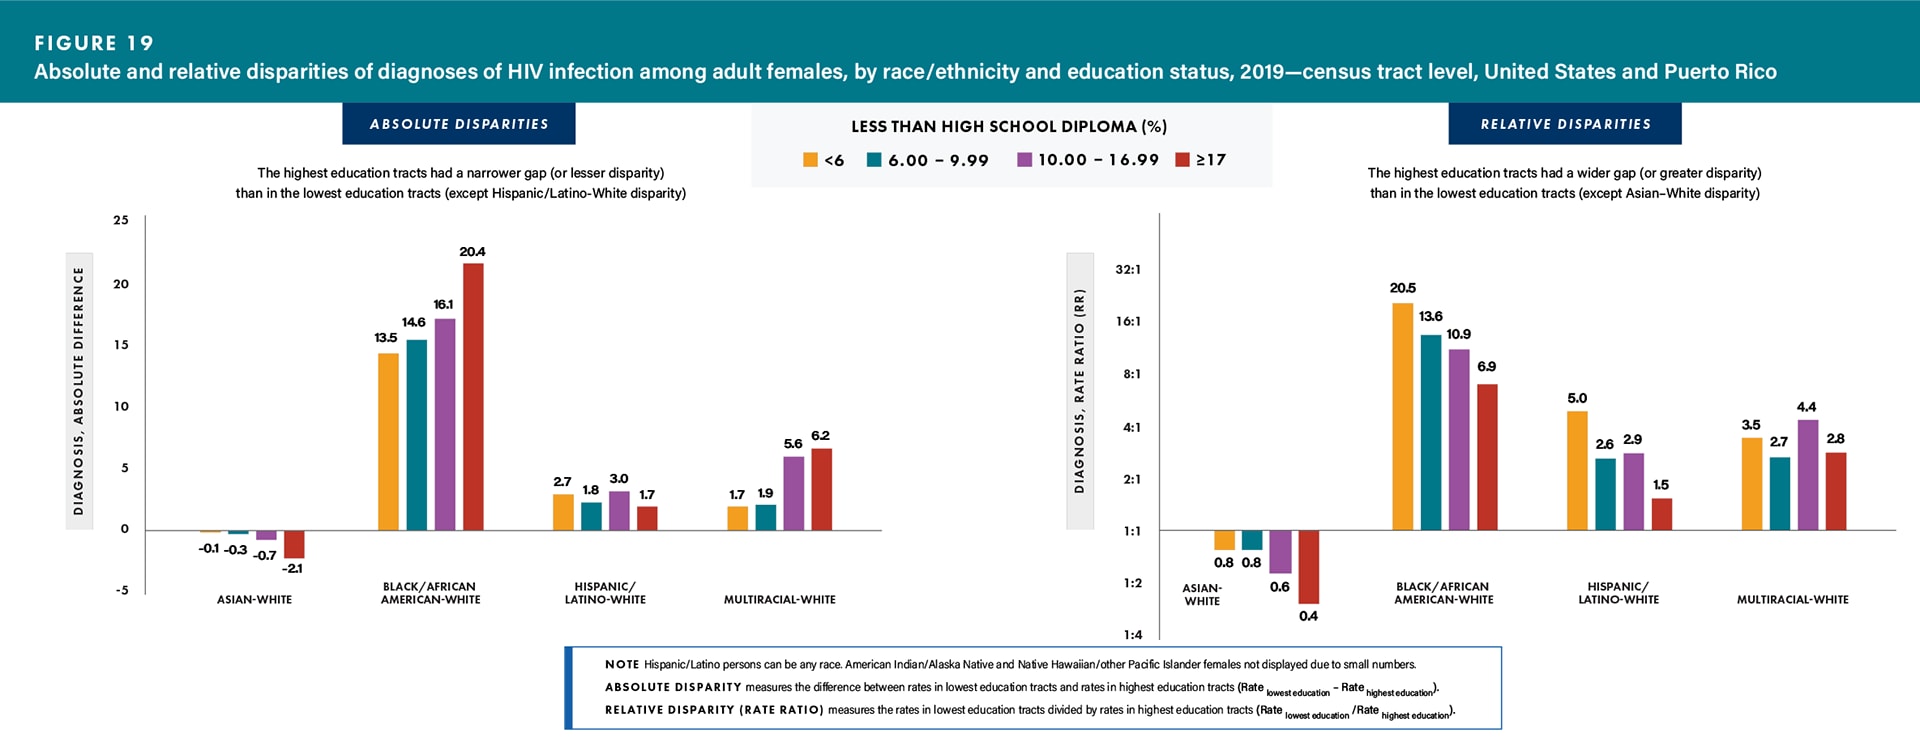 For absolute disparities, the highest education tracts had a narrower gap (or lesser disparity) than in the lowest education tracts (except Hispanic/Latino–White disparity). For relative disparities, the highest education tracts had a wider gap (or greater disparity) than in the lowest education tracts (except Asian–White disparity).